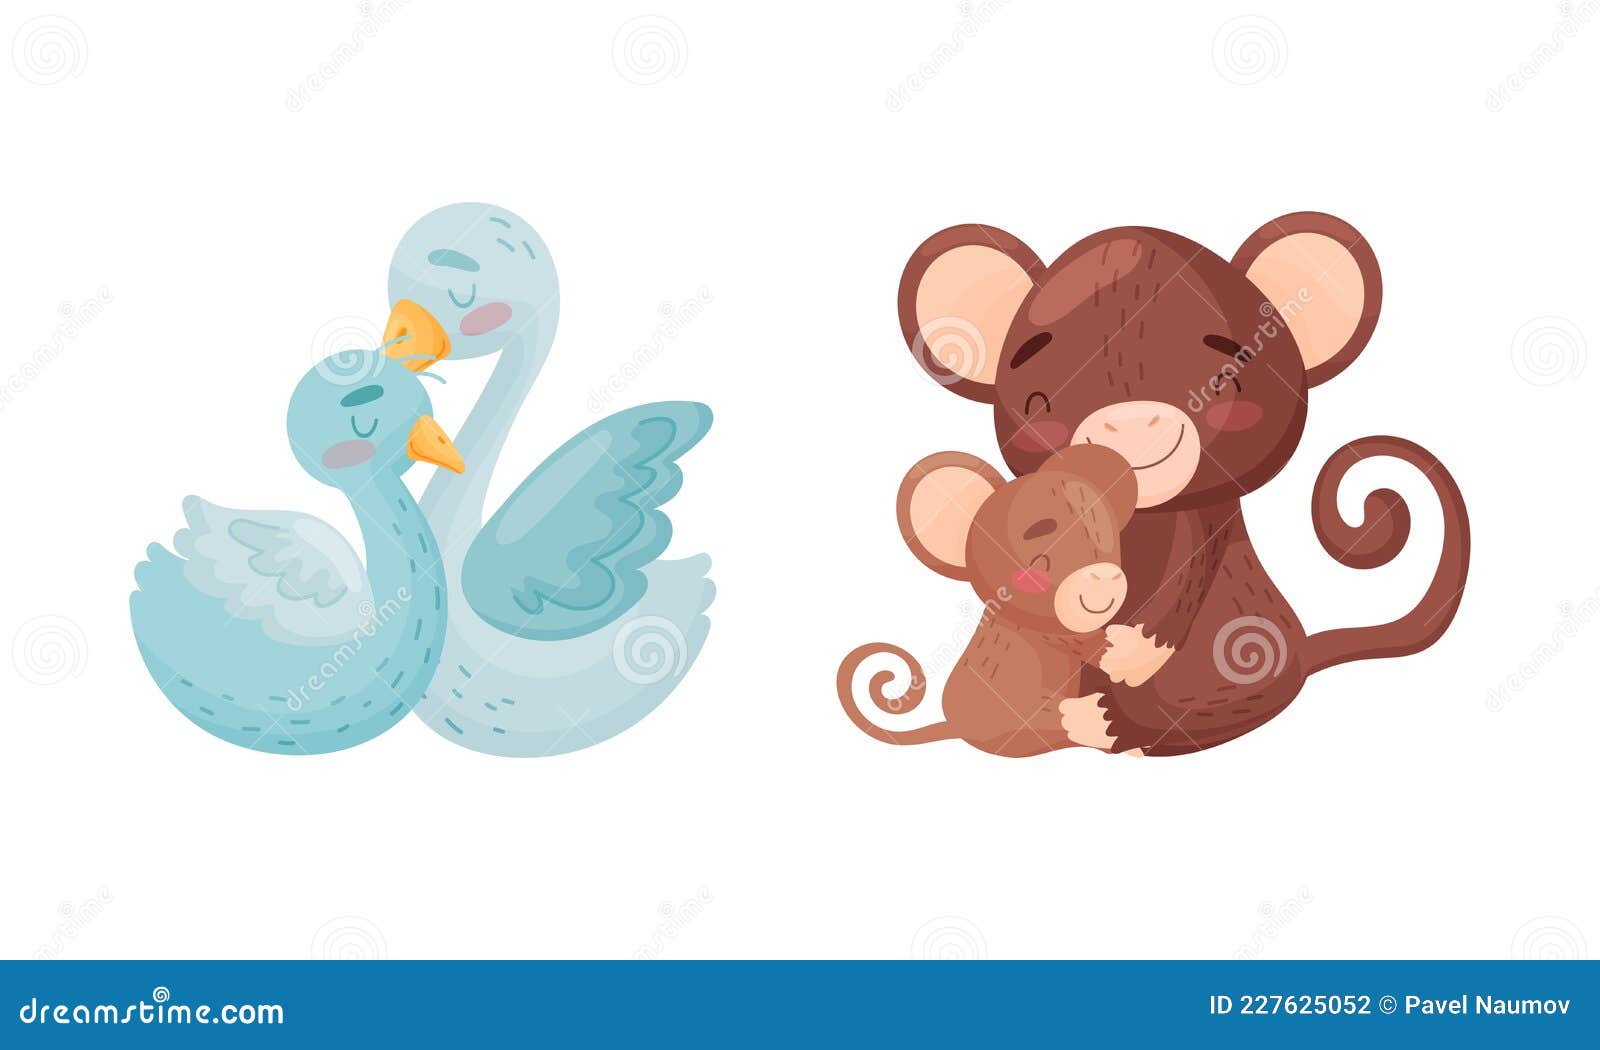 Mother and Baby Animals Set. Swan and Monkey Moms Hugging Their Kids Cartoon  Vector Illustration Stock Vector - Illustration of child, wildlife:  227625052